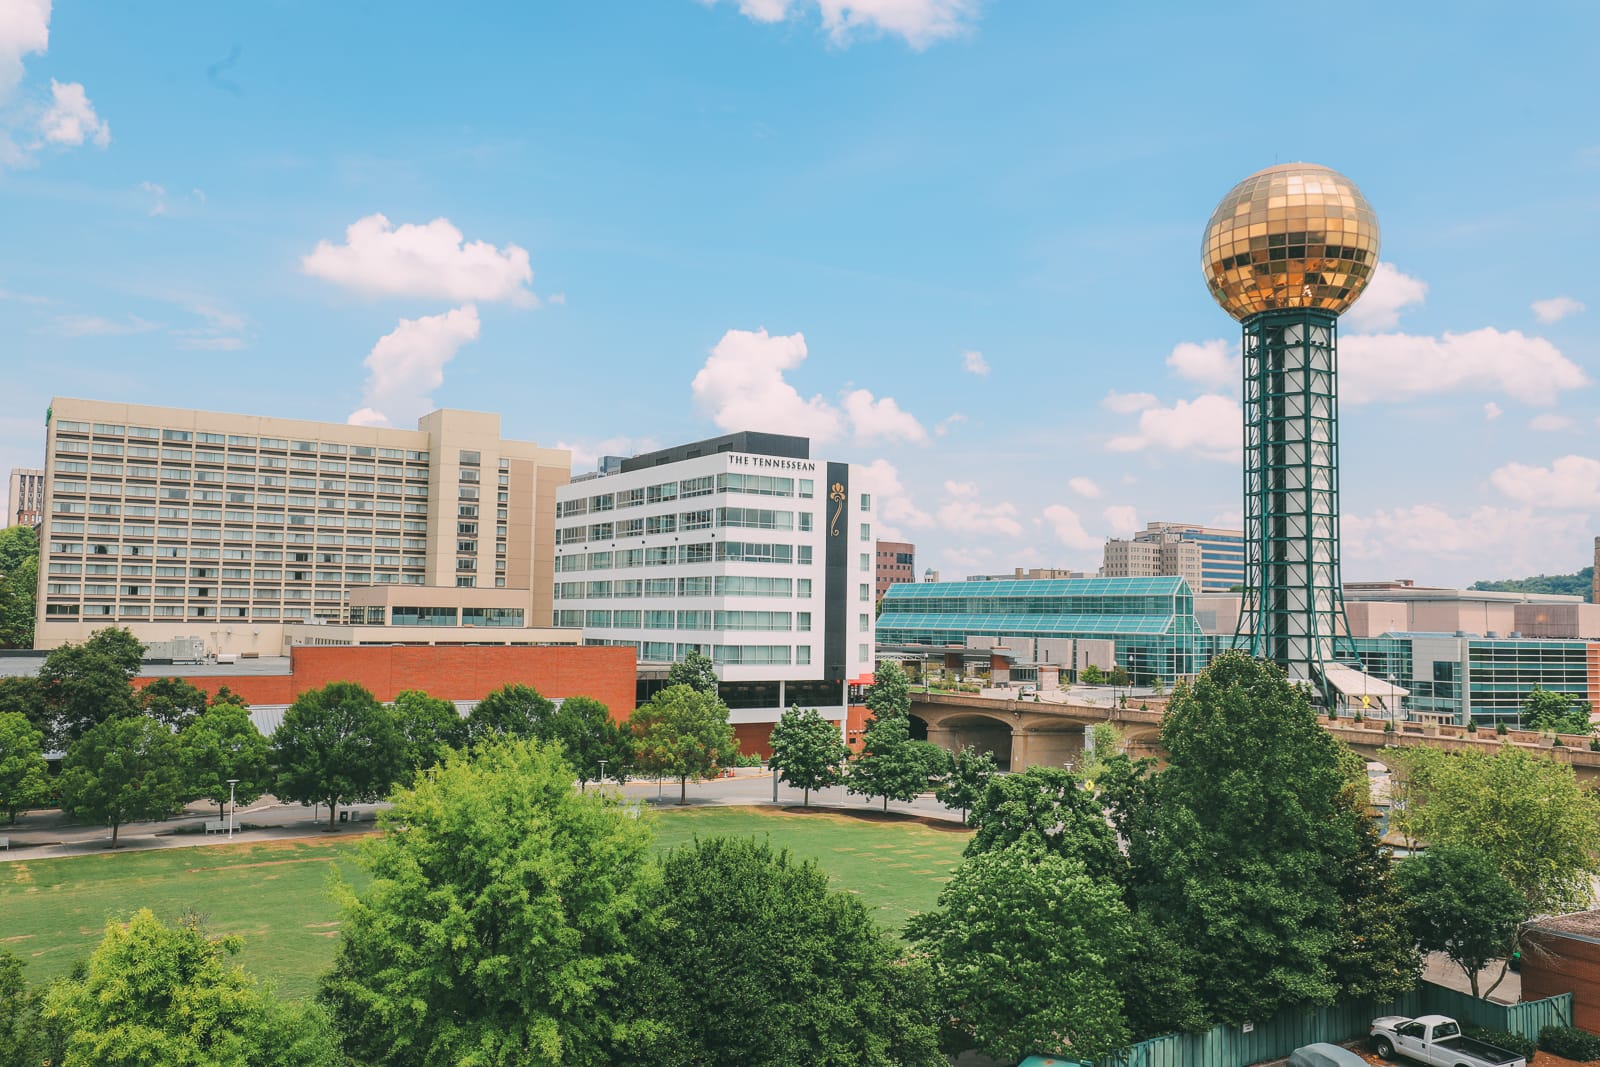 14 Best Things To Do In Knoxville, Tennessee - Hand Luggage Only